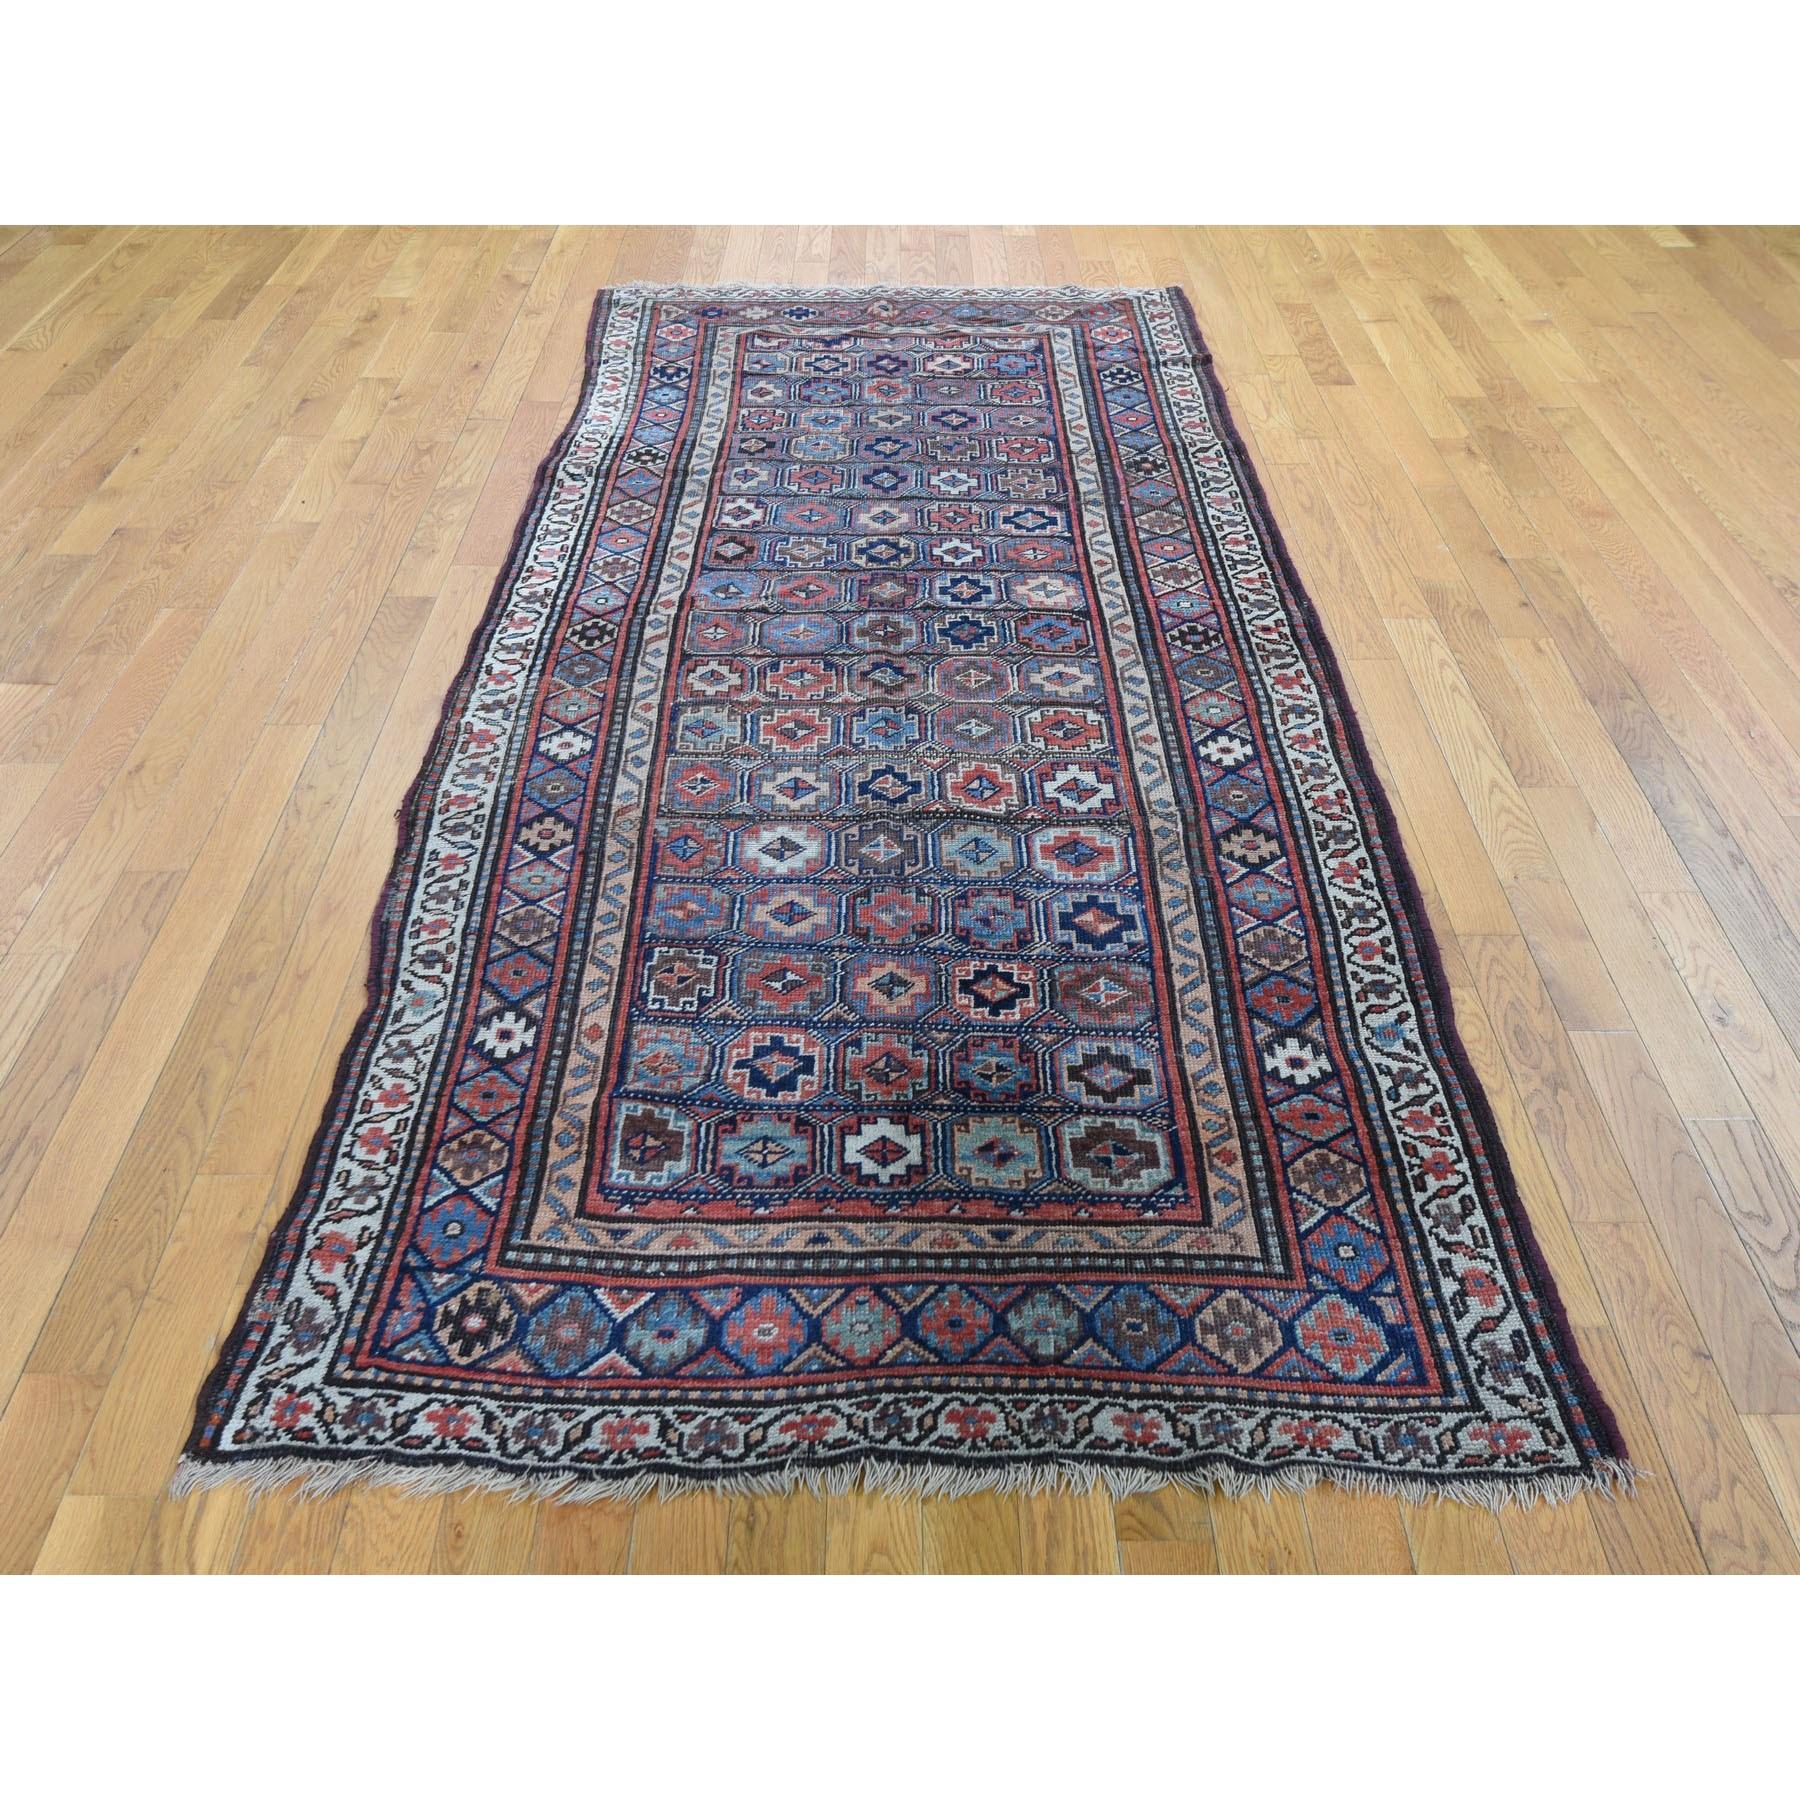 This is a truly genuine one-of-a-kind blue antique Caucasian Kazak even wear wide runner hand knotted rug. It has been knotted for months and months in the centuries-old Persian weaving craftsmanship techniques by expert artisans. 

Primary